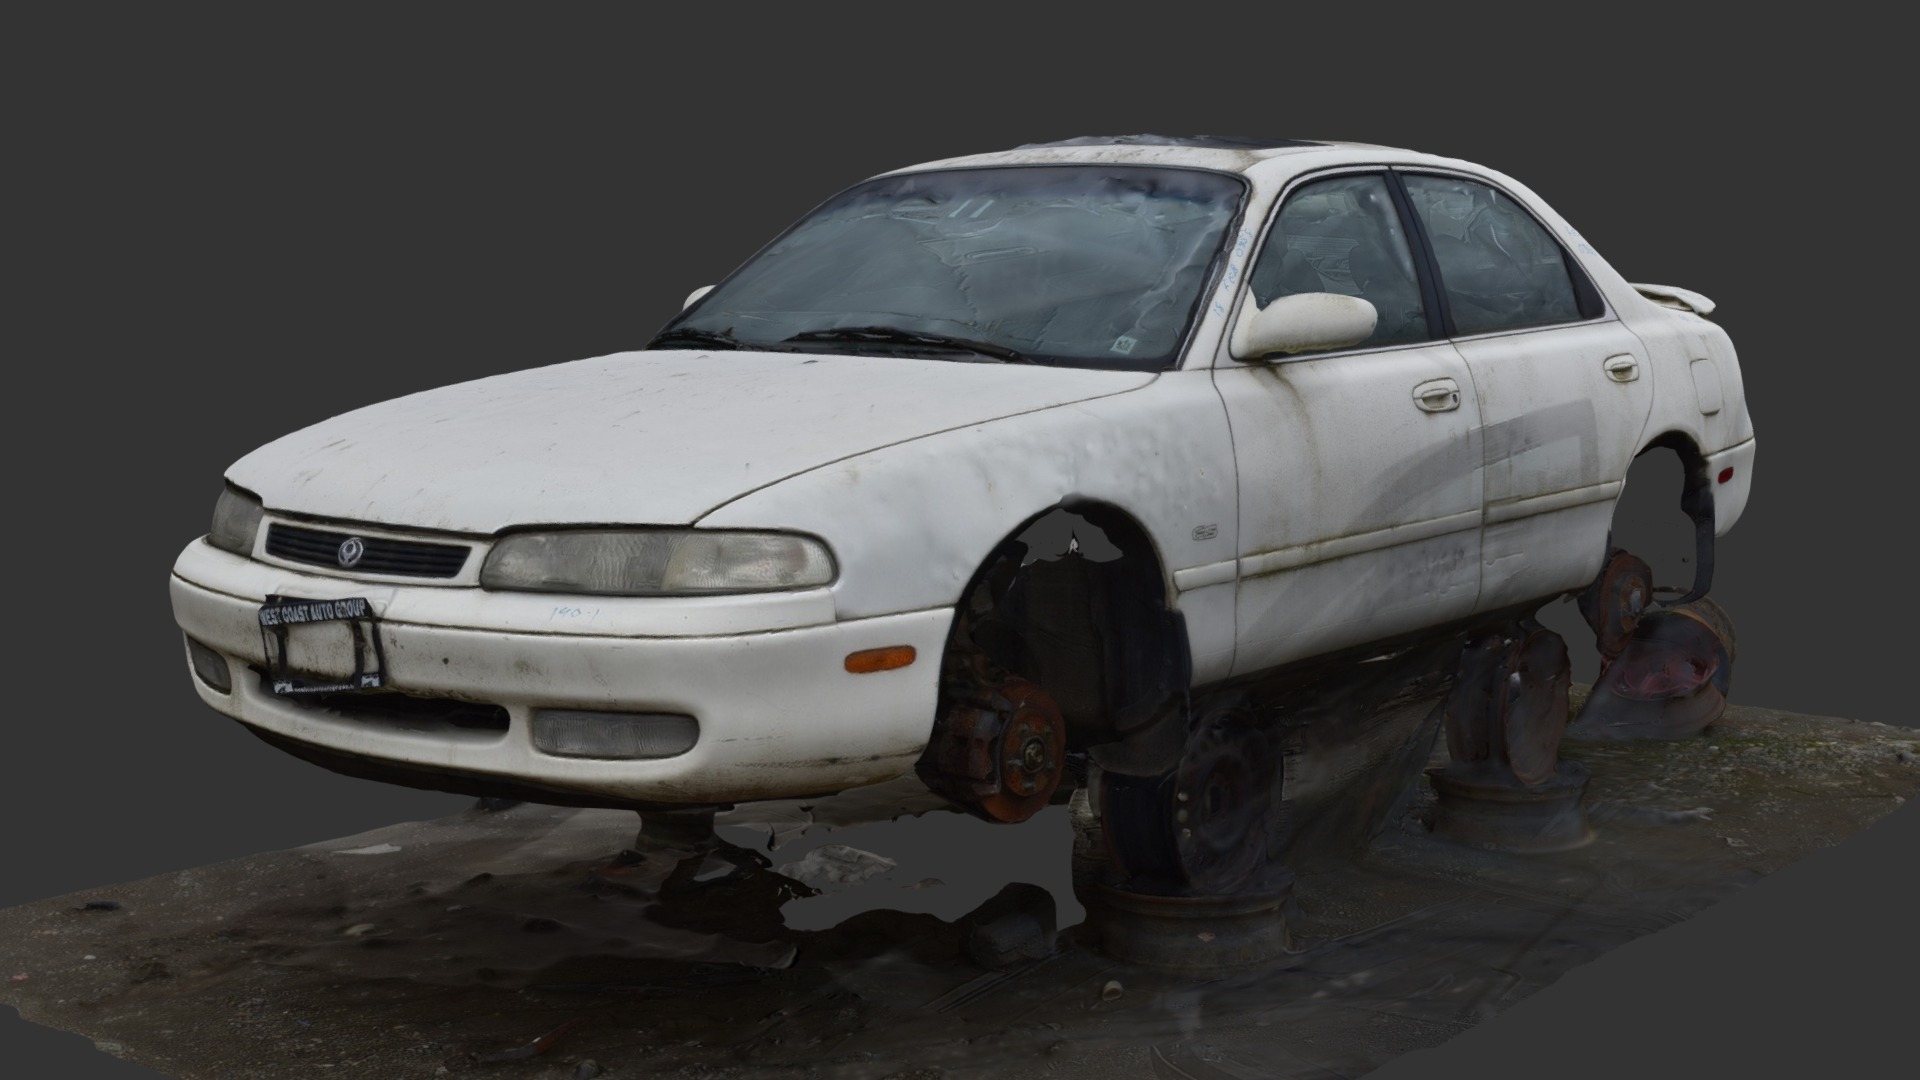 3D model (3D Scan) Salvage Yard Car - This is a 3D model of the (3D Scan) Salvage Yard Car. The 3D model is about a white car with a damaged front end.